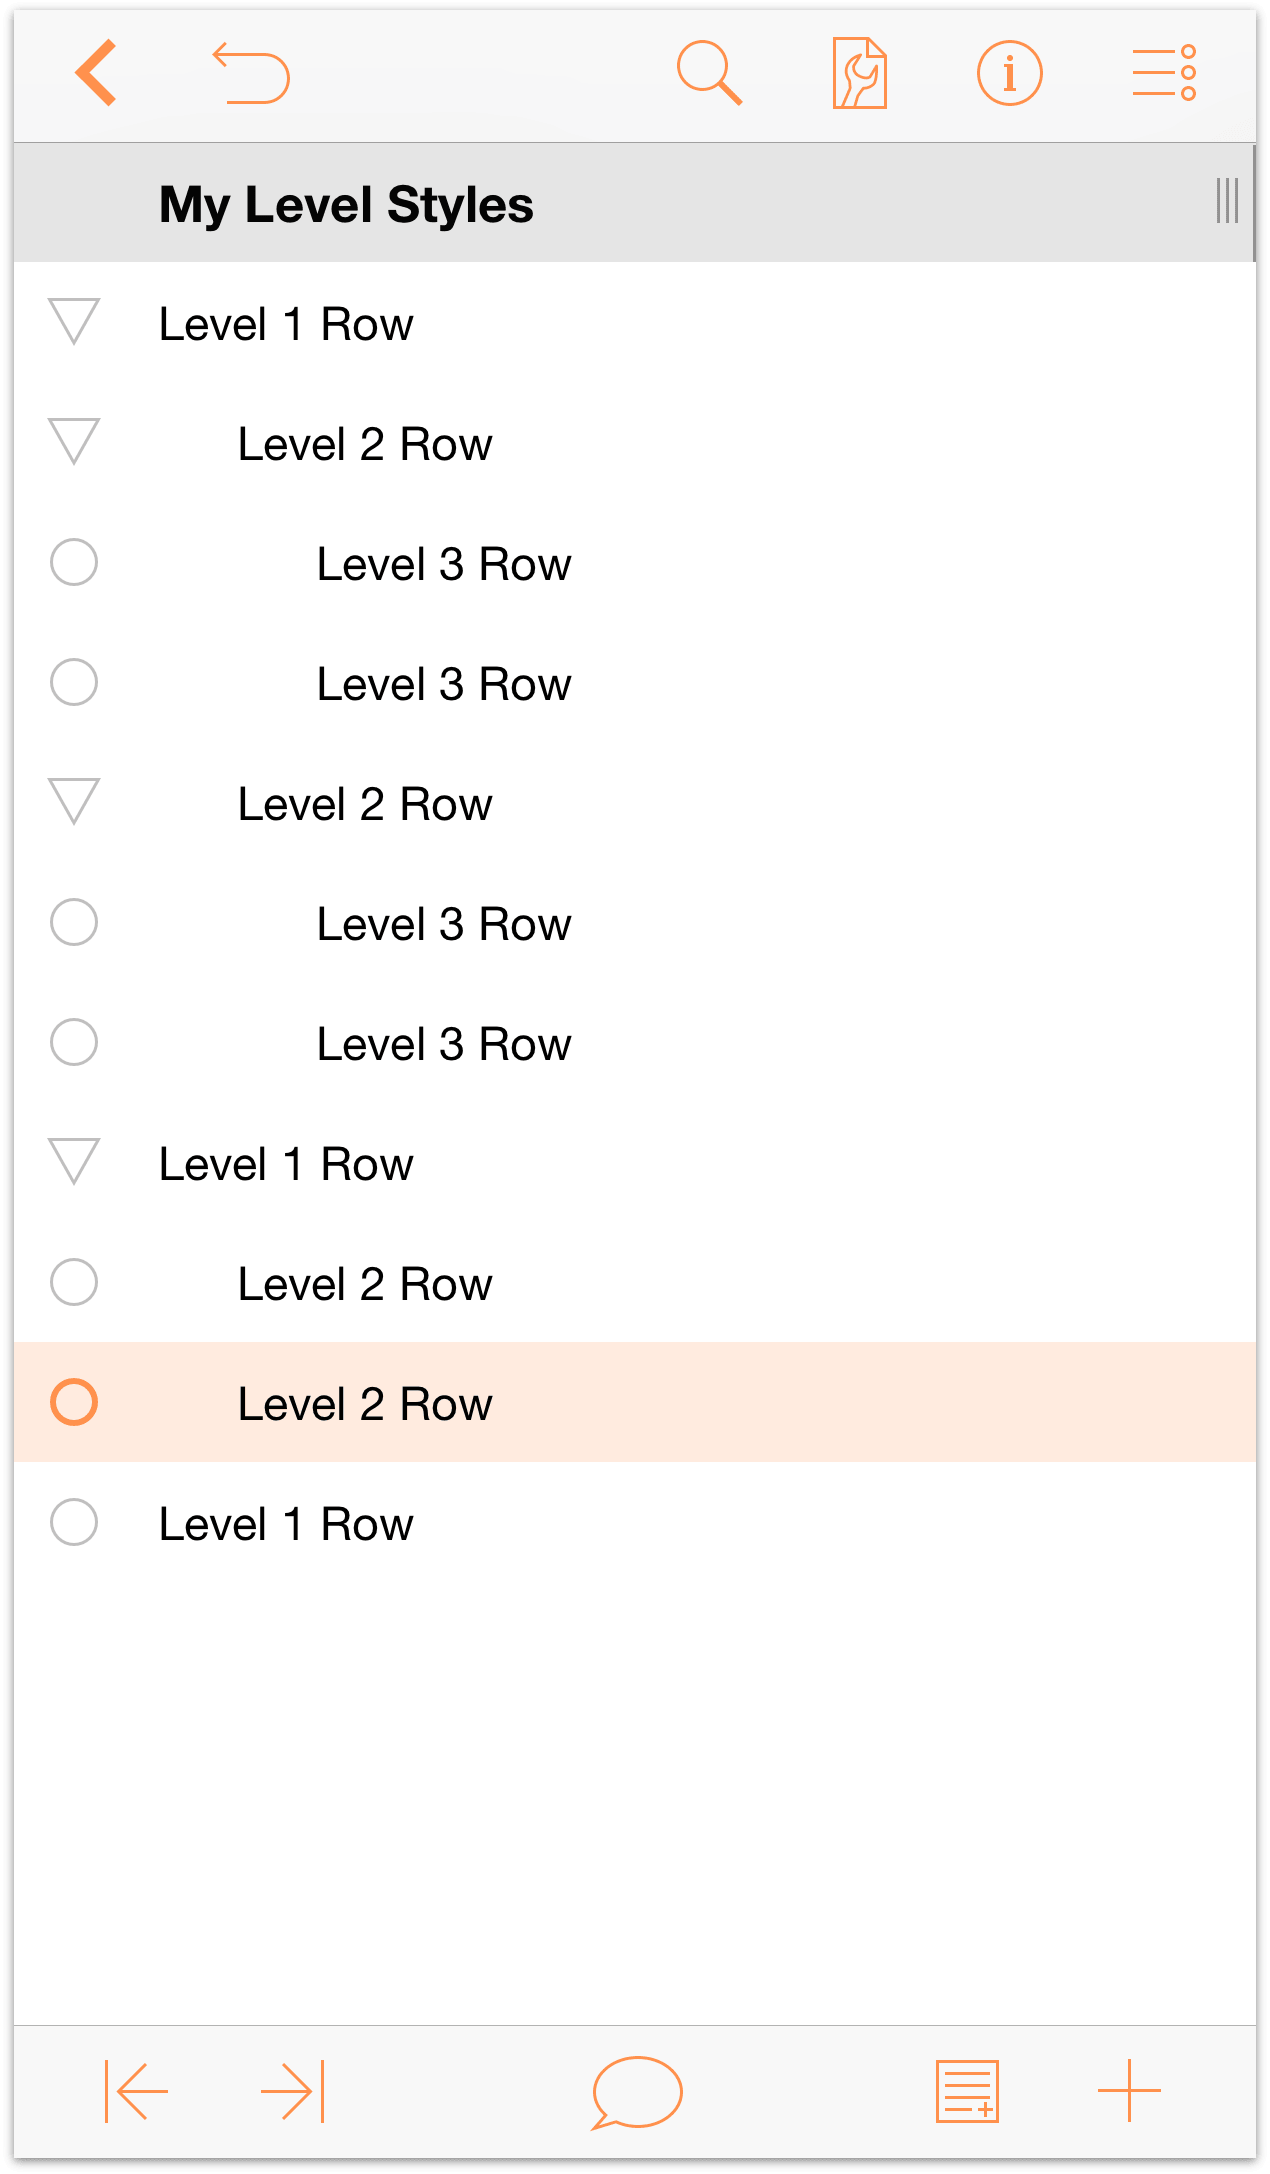 Indenting the Level 2 Rows